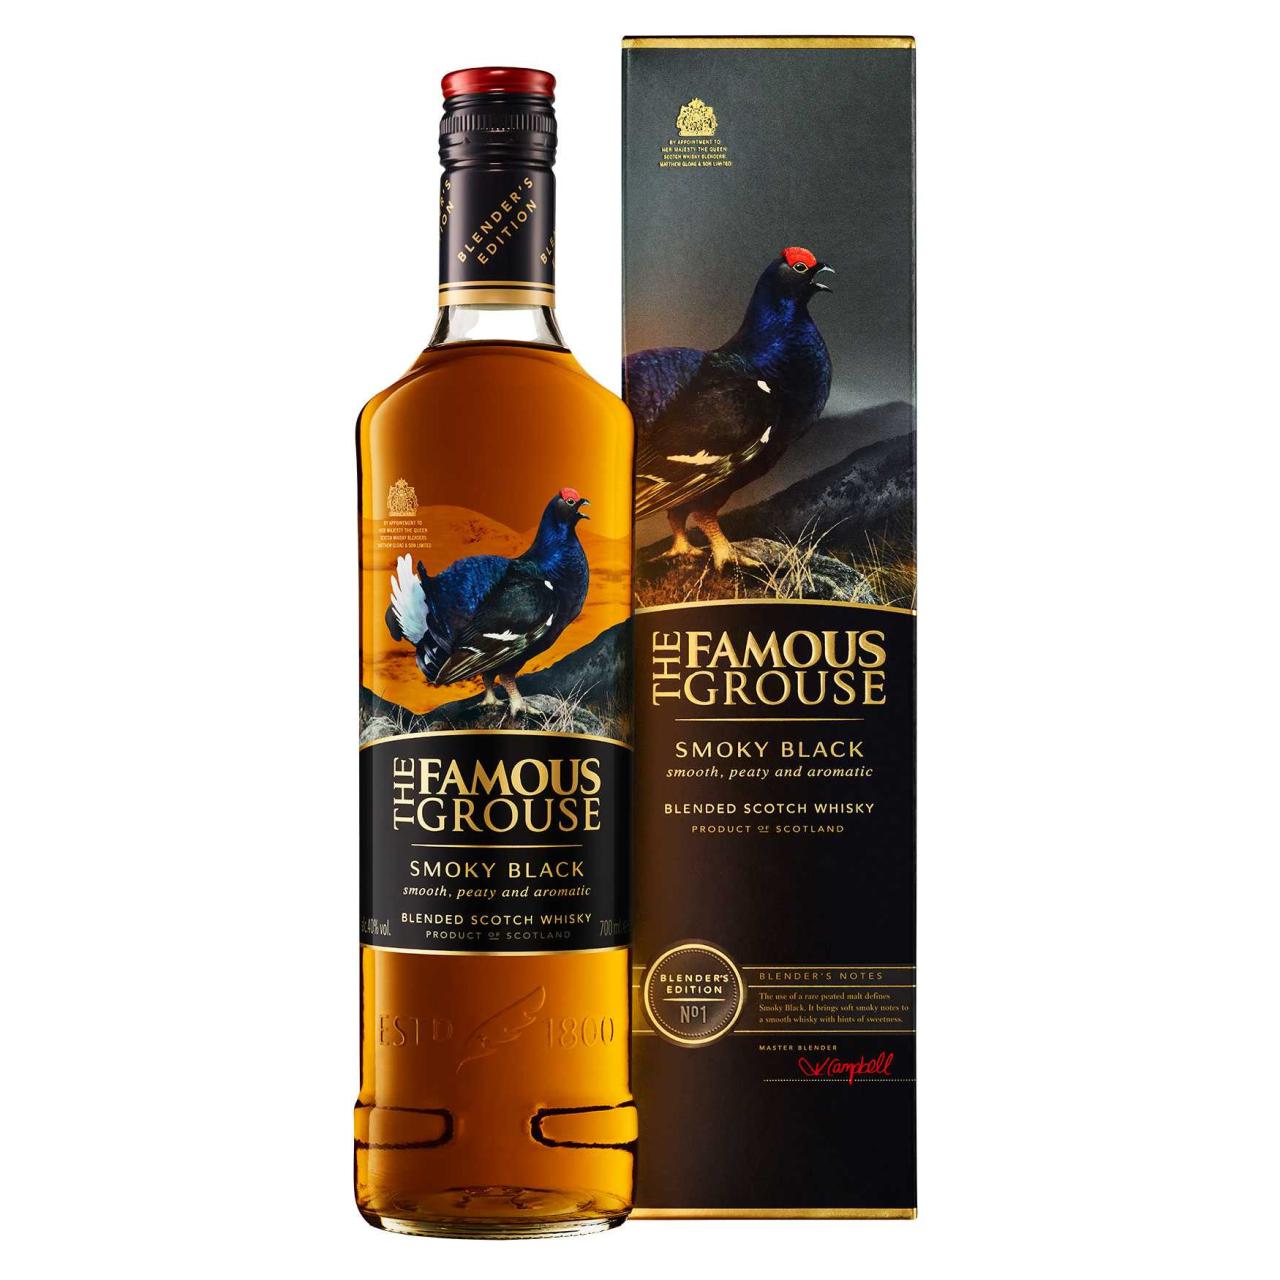 The Famous Grouse Smoky Black Whisky 40% 1,0l